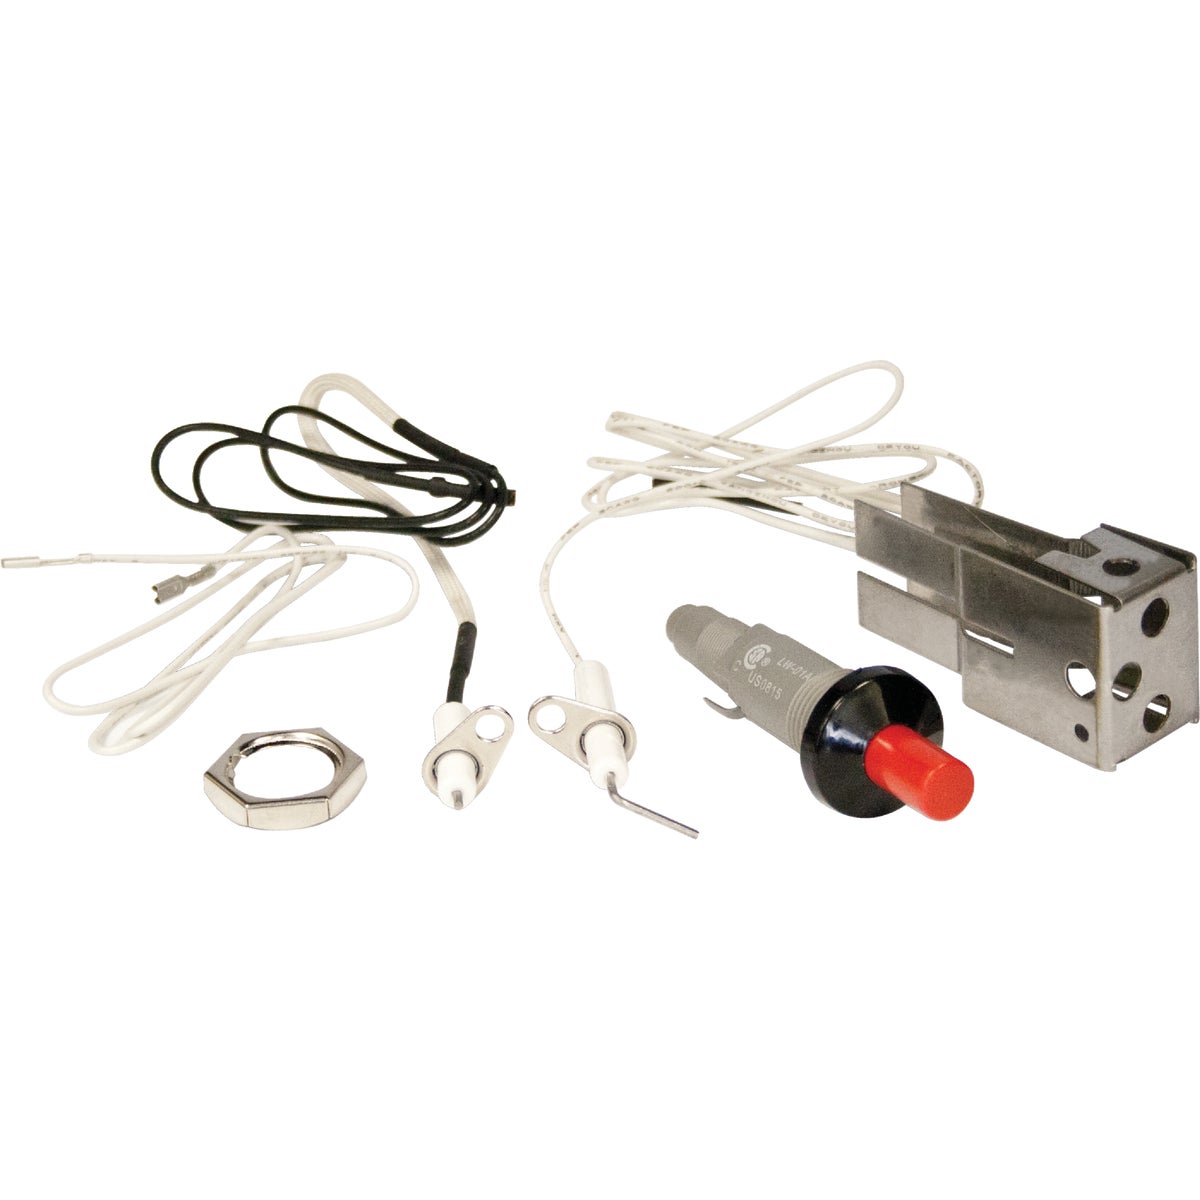 Item 800135, Universal fit push-button replacement igniter kit.